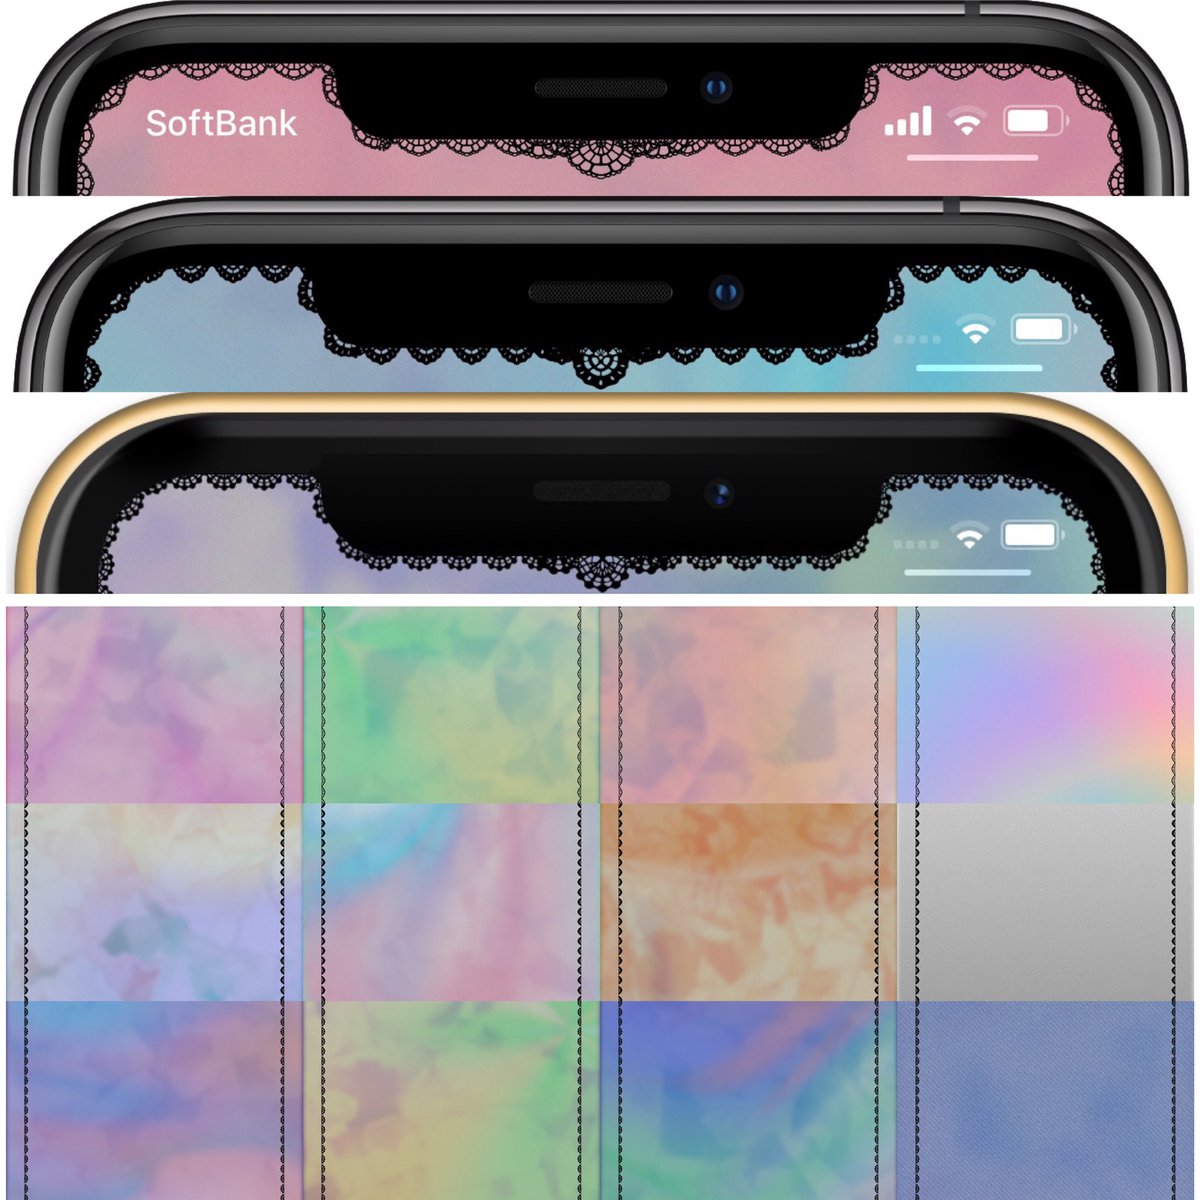 Hide Mysterious Iphone Wallpaper 不思議なiphone壁紙 Twitterren Xシリーズiphoneのベゼルをレースにする壁紙刷新 Xs Maxとxrにも対応 各12枚 一部ではドックの下が Wallpaper Which Makes The Bezel Of X Series Iphone Lace Pattern Is Renewed Xs Max And